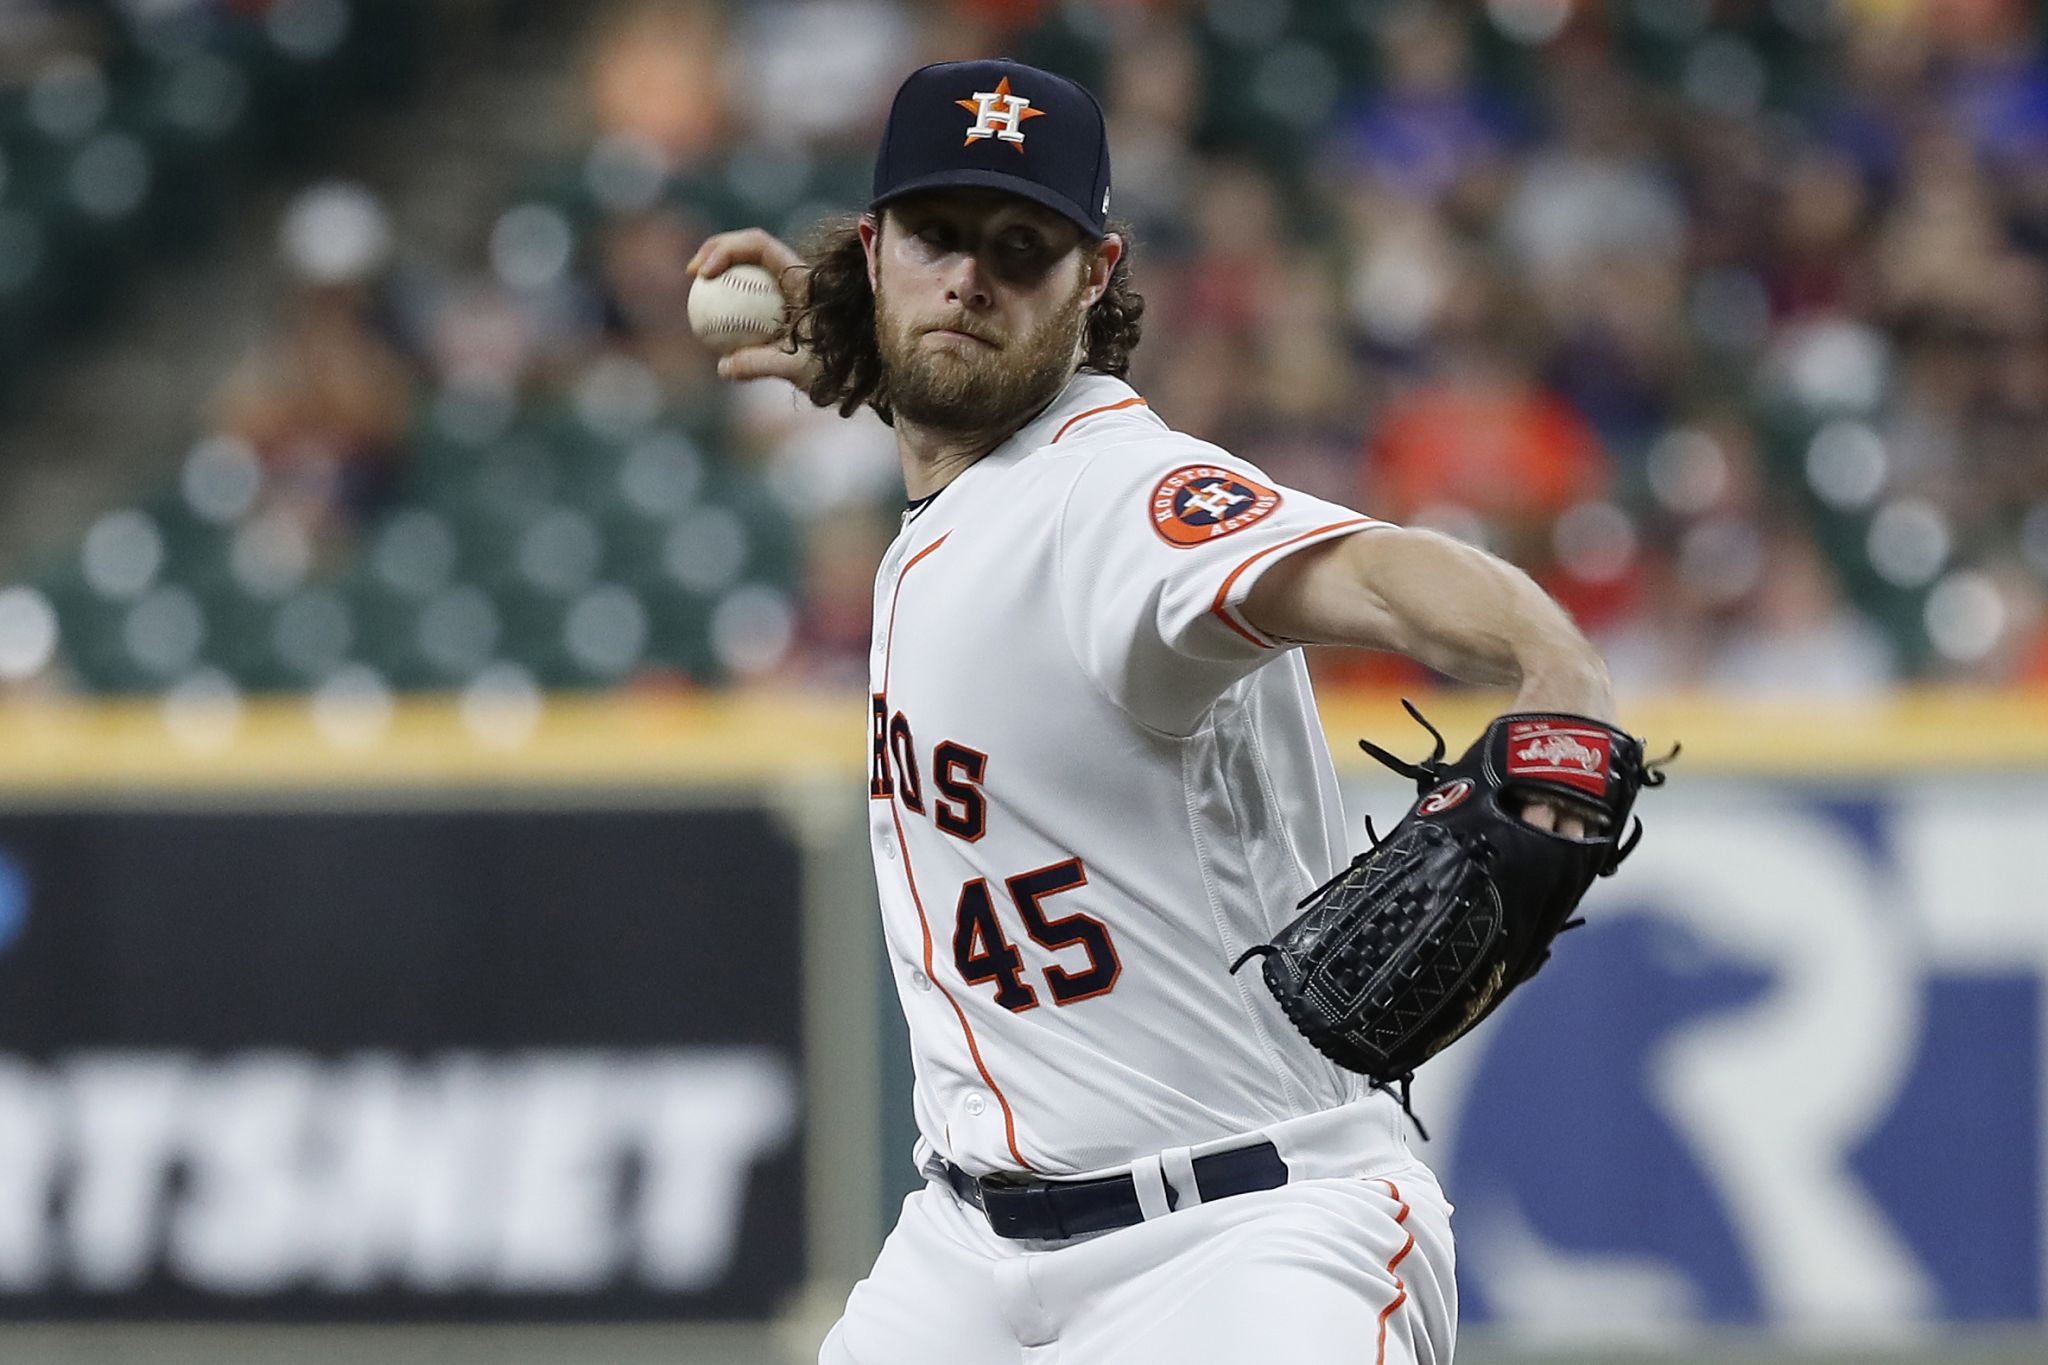 MLB: Cole looks to close out ALDS for Astros against Rays